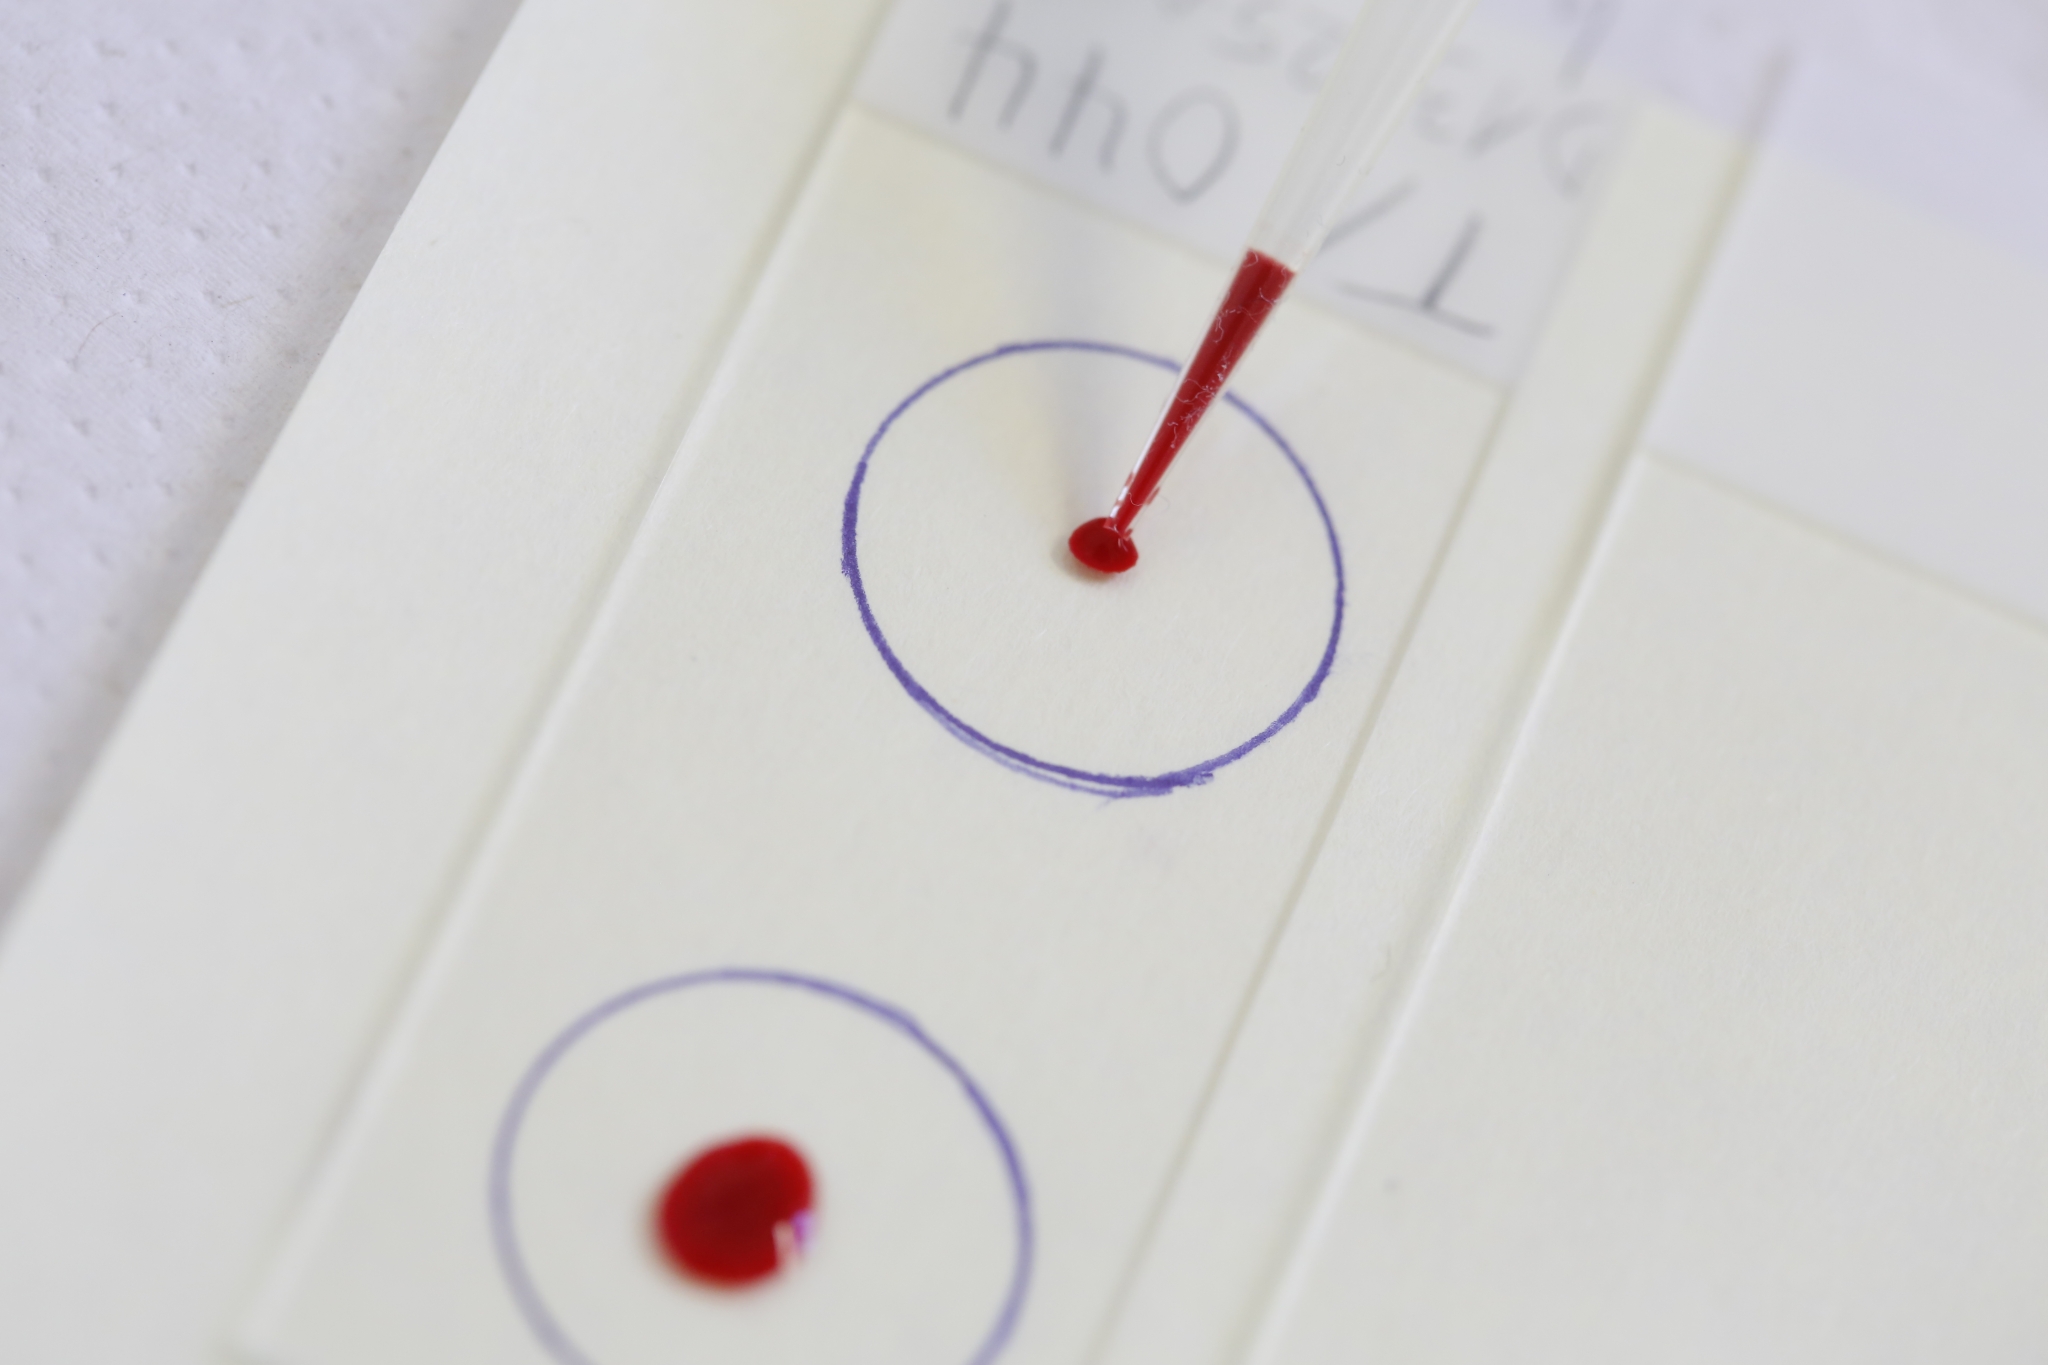 Photo of a plastic slide onto which blood is applied with a pipette. The blood is analysed for the presence of malaria parasites.